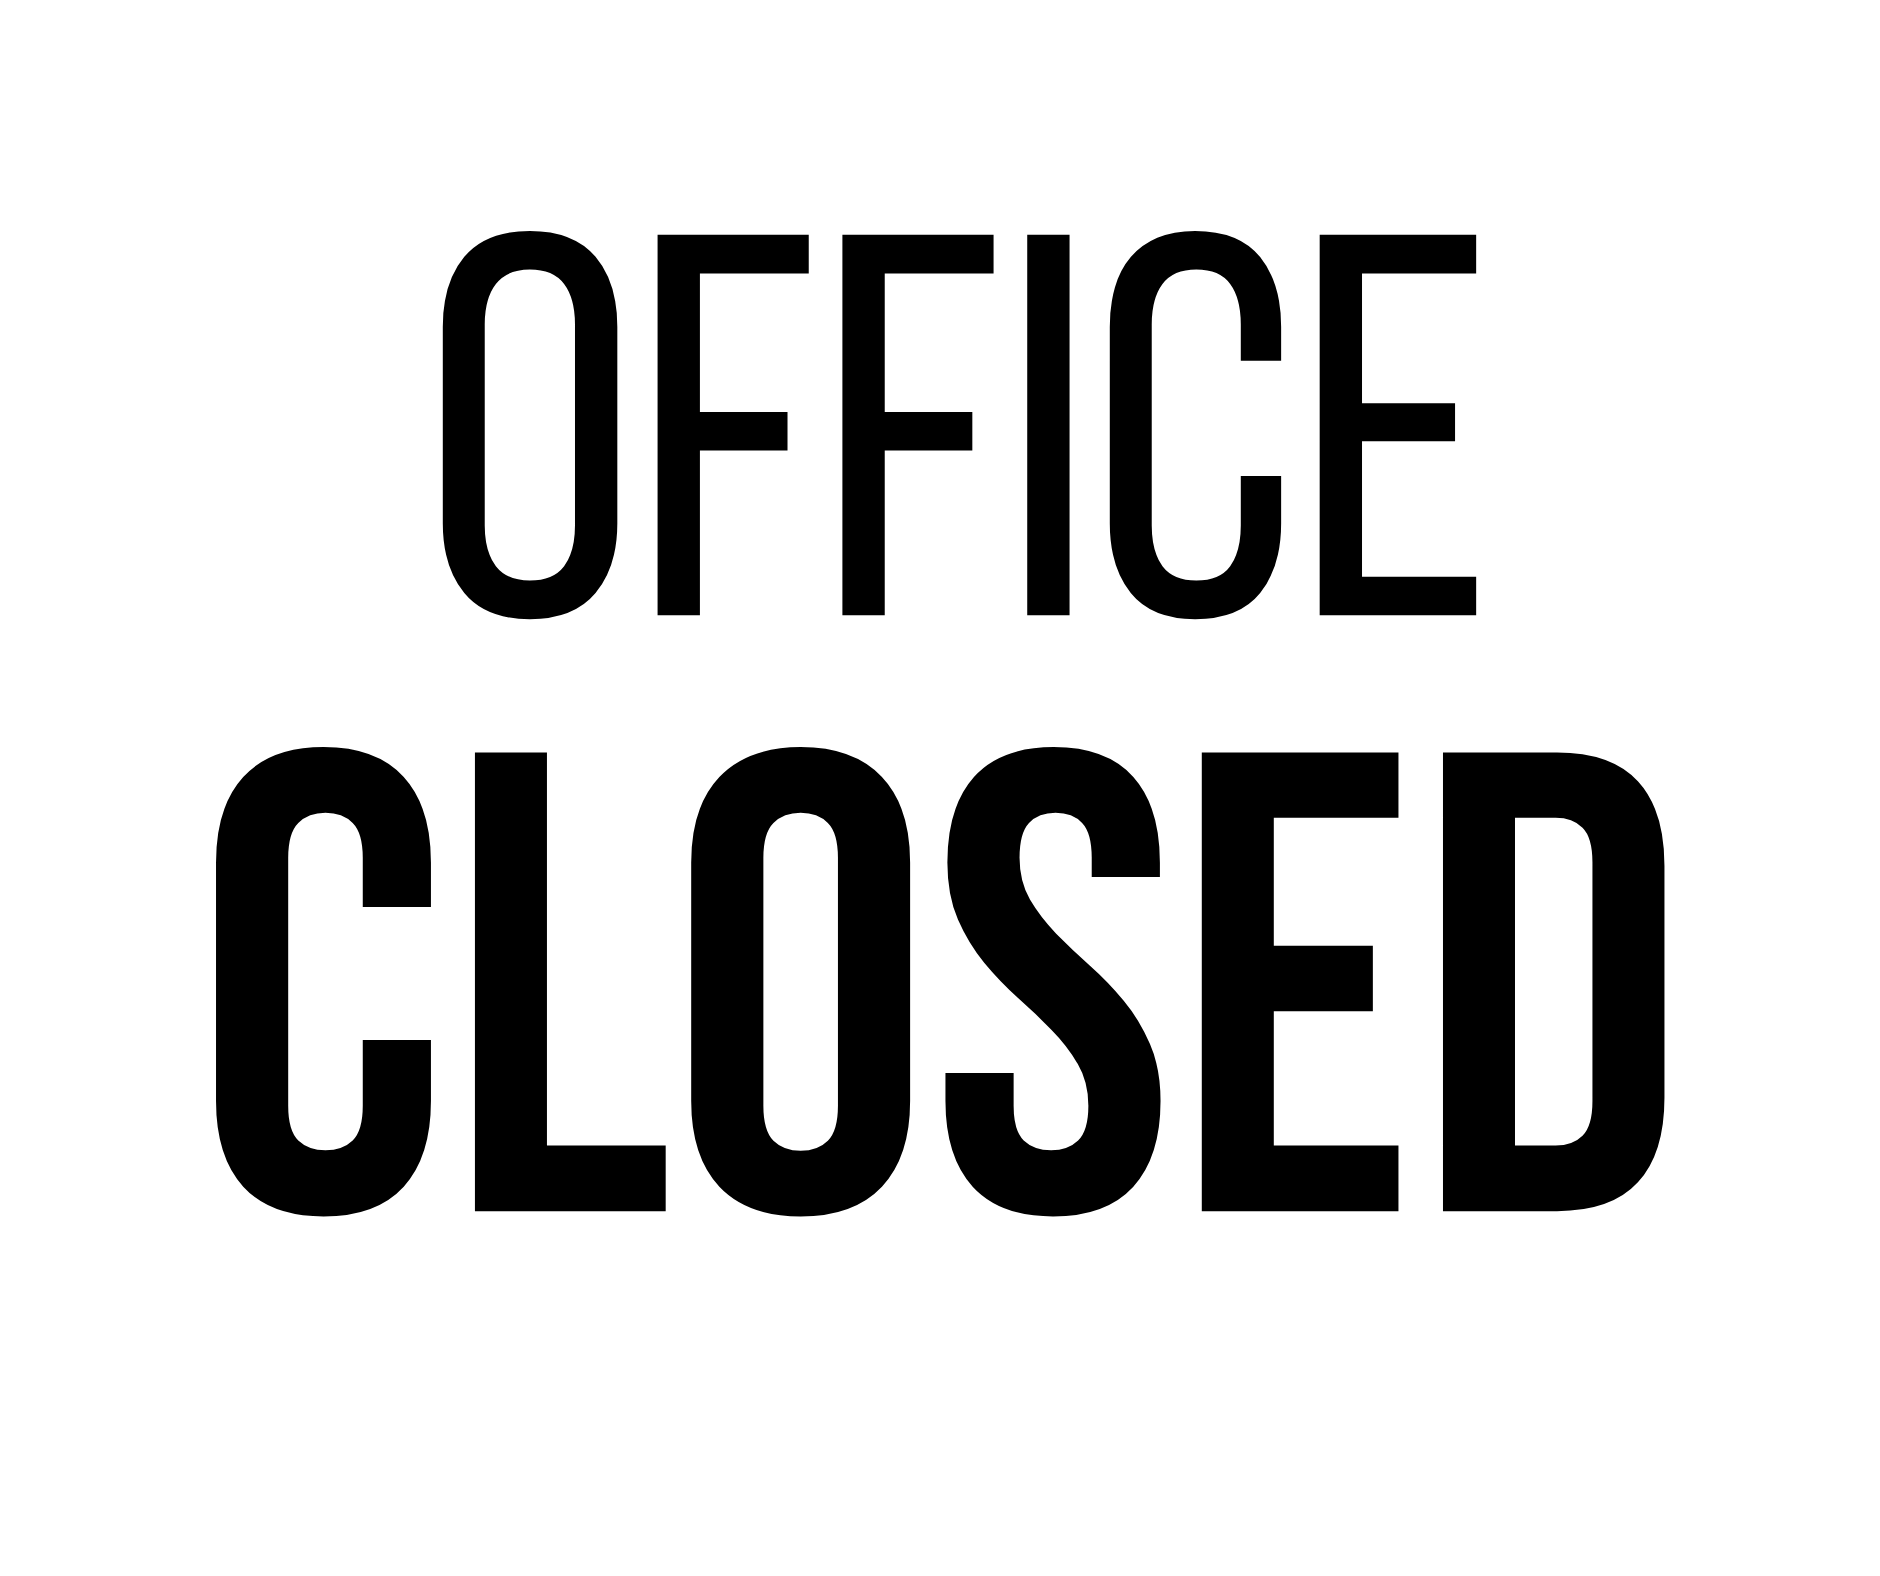 office will be closed sign